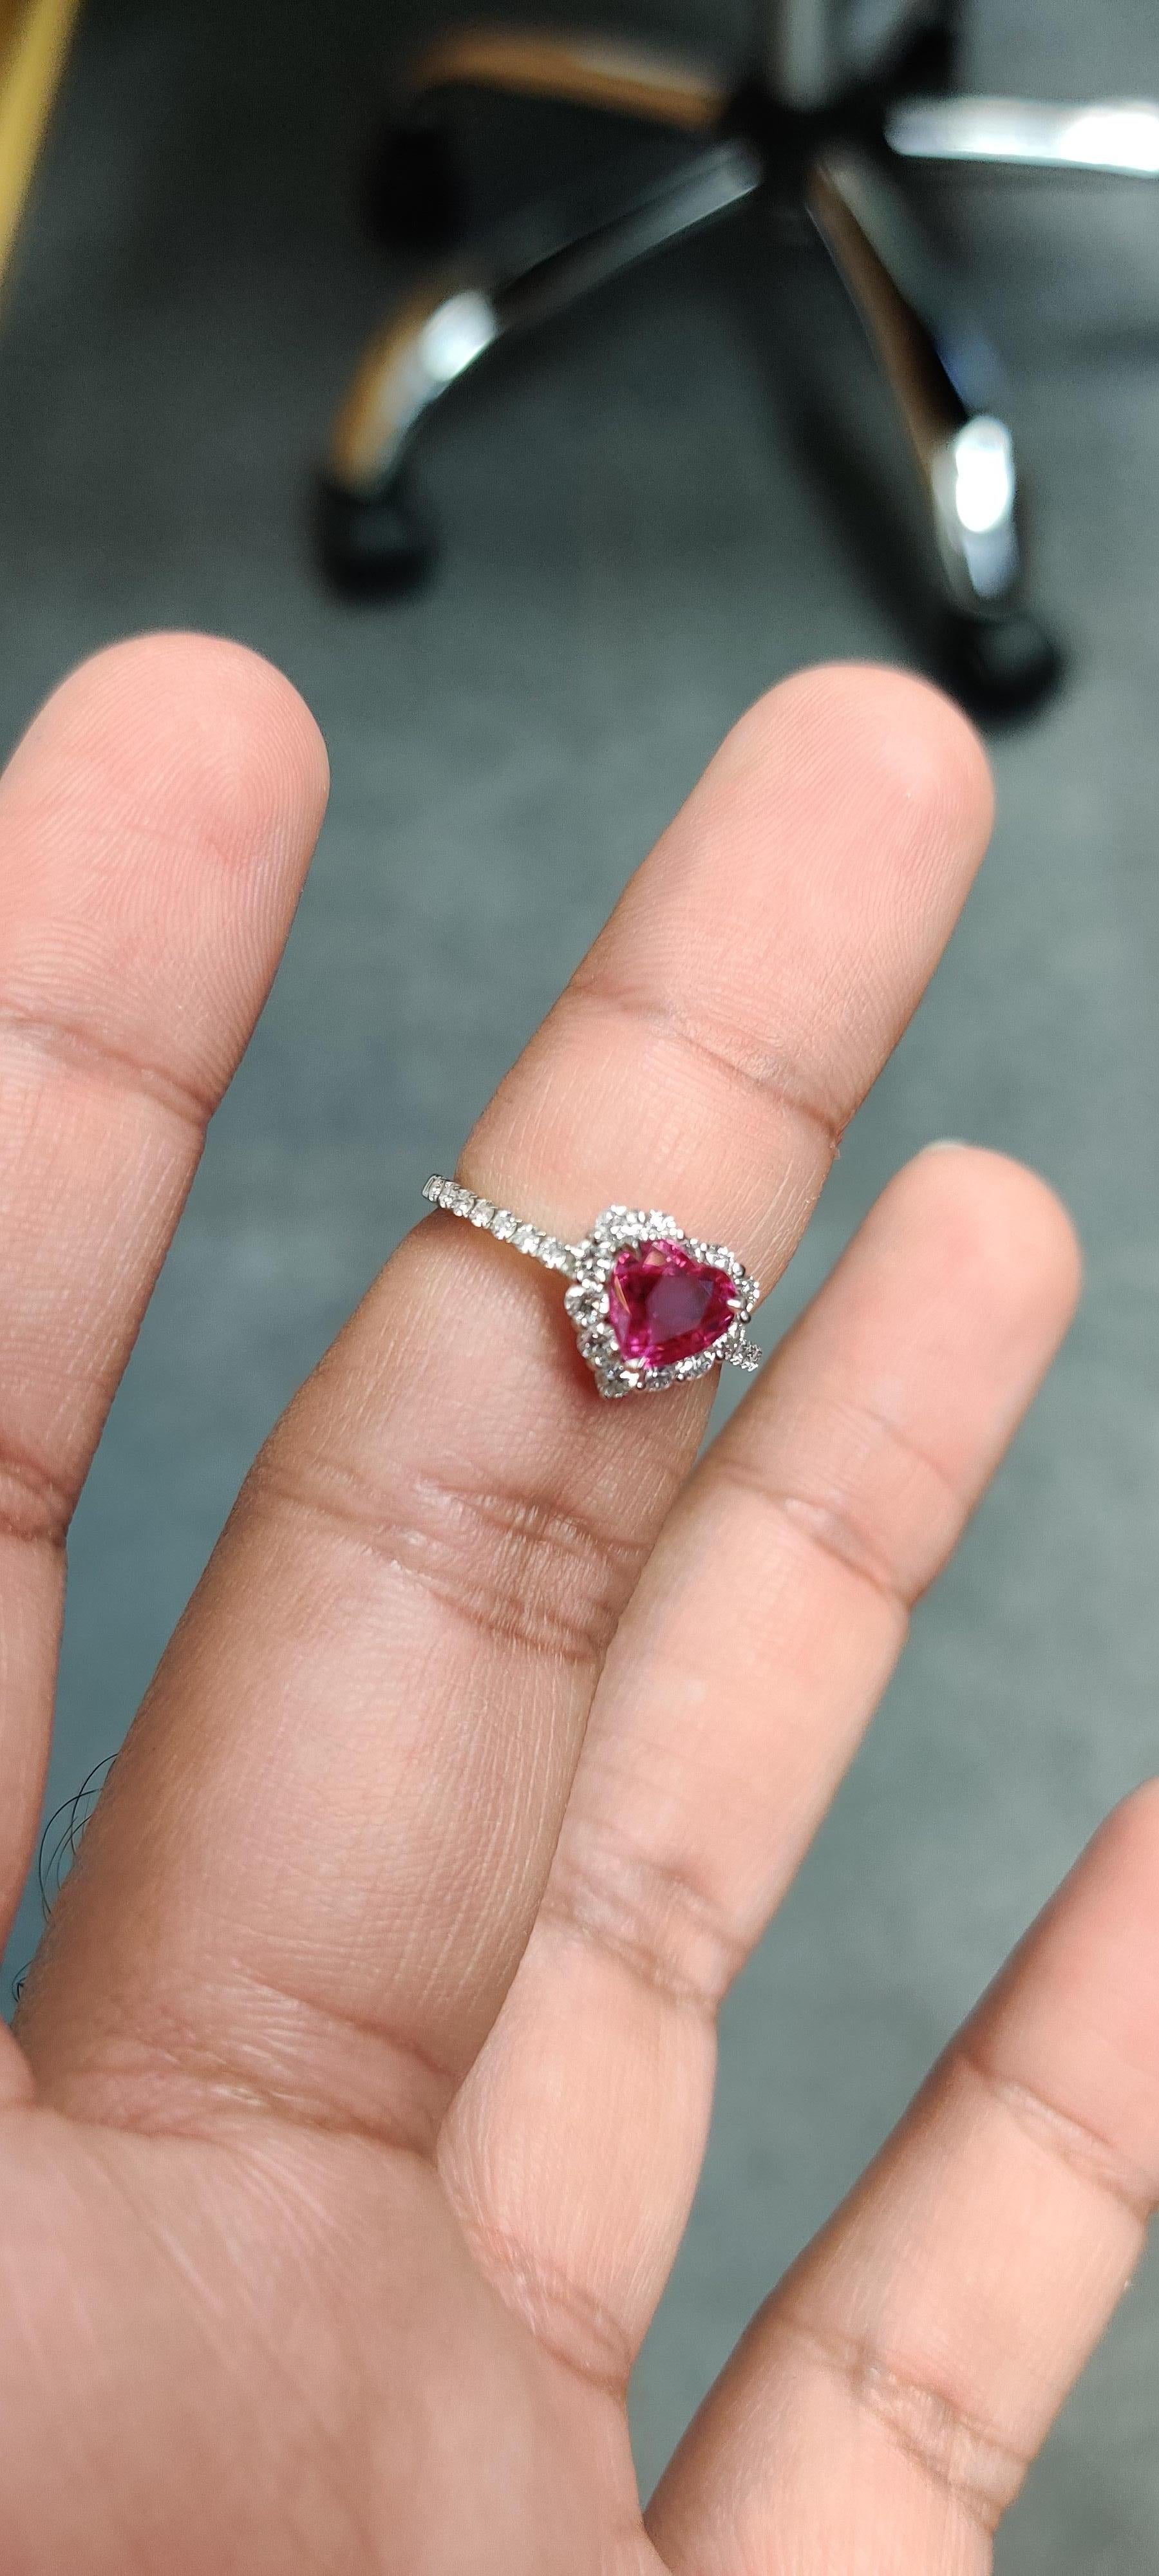 Art Deco 1.23 Carat Heart Shaped Ruby Ring in Platinum 900 For Sale